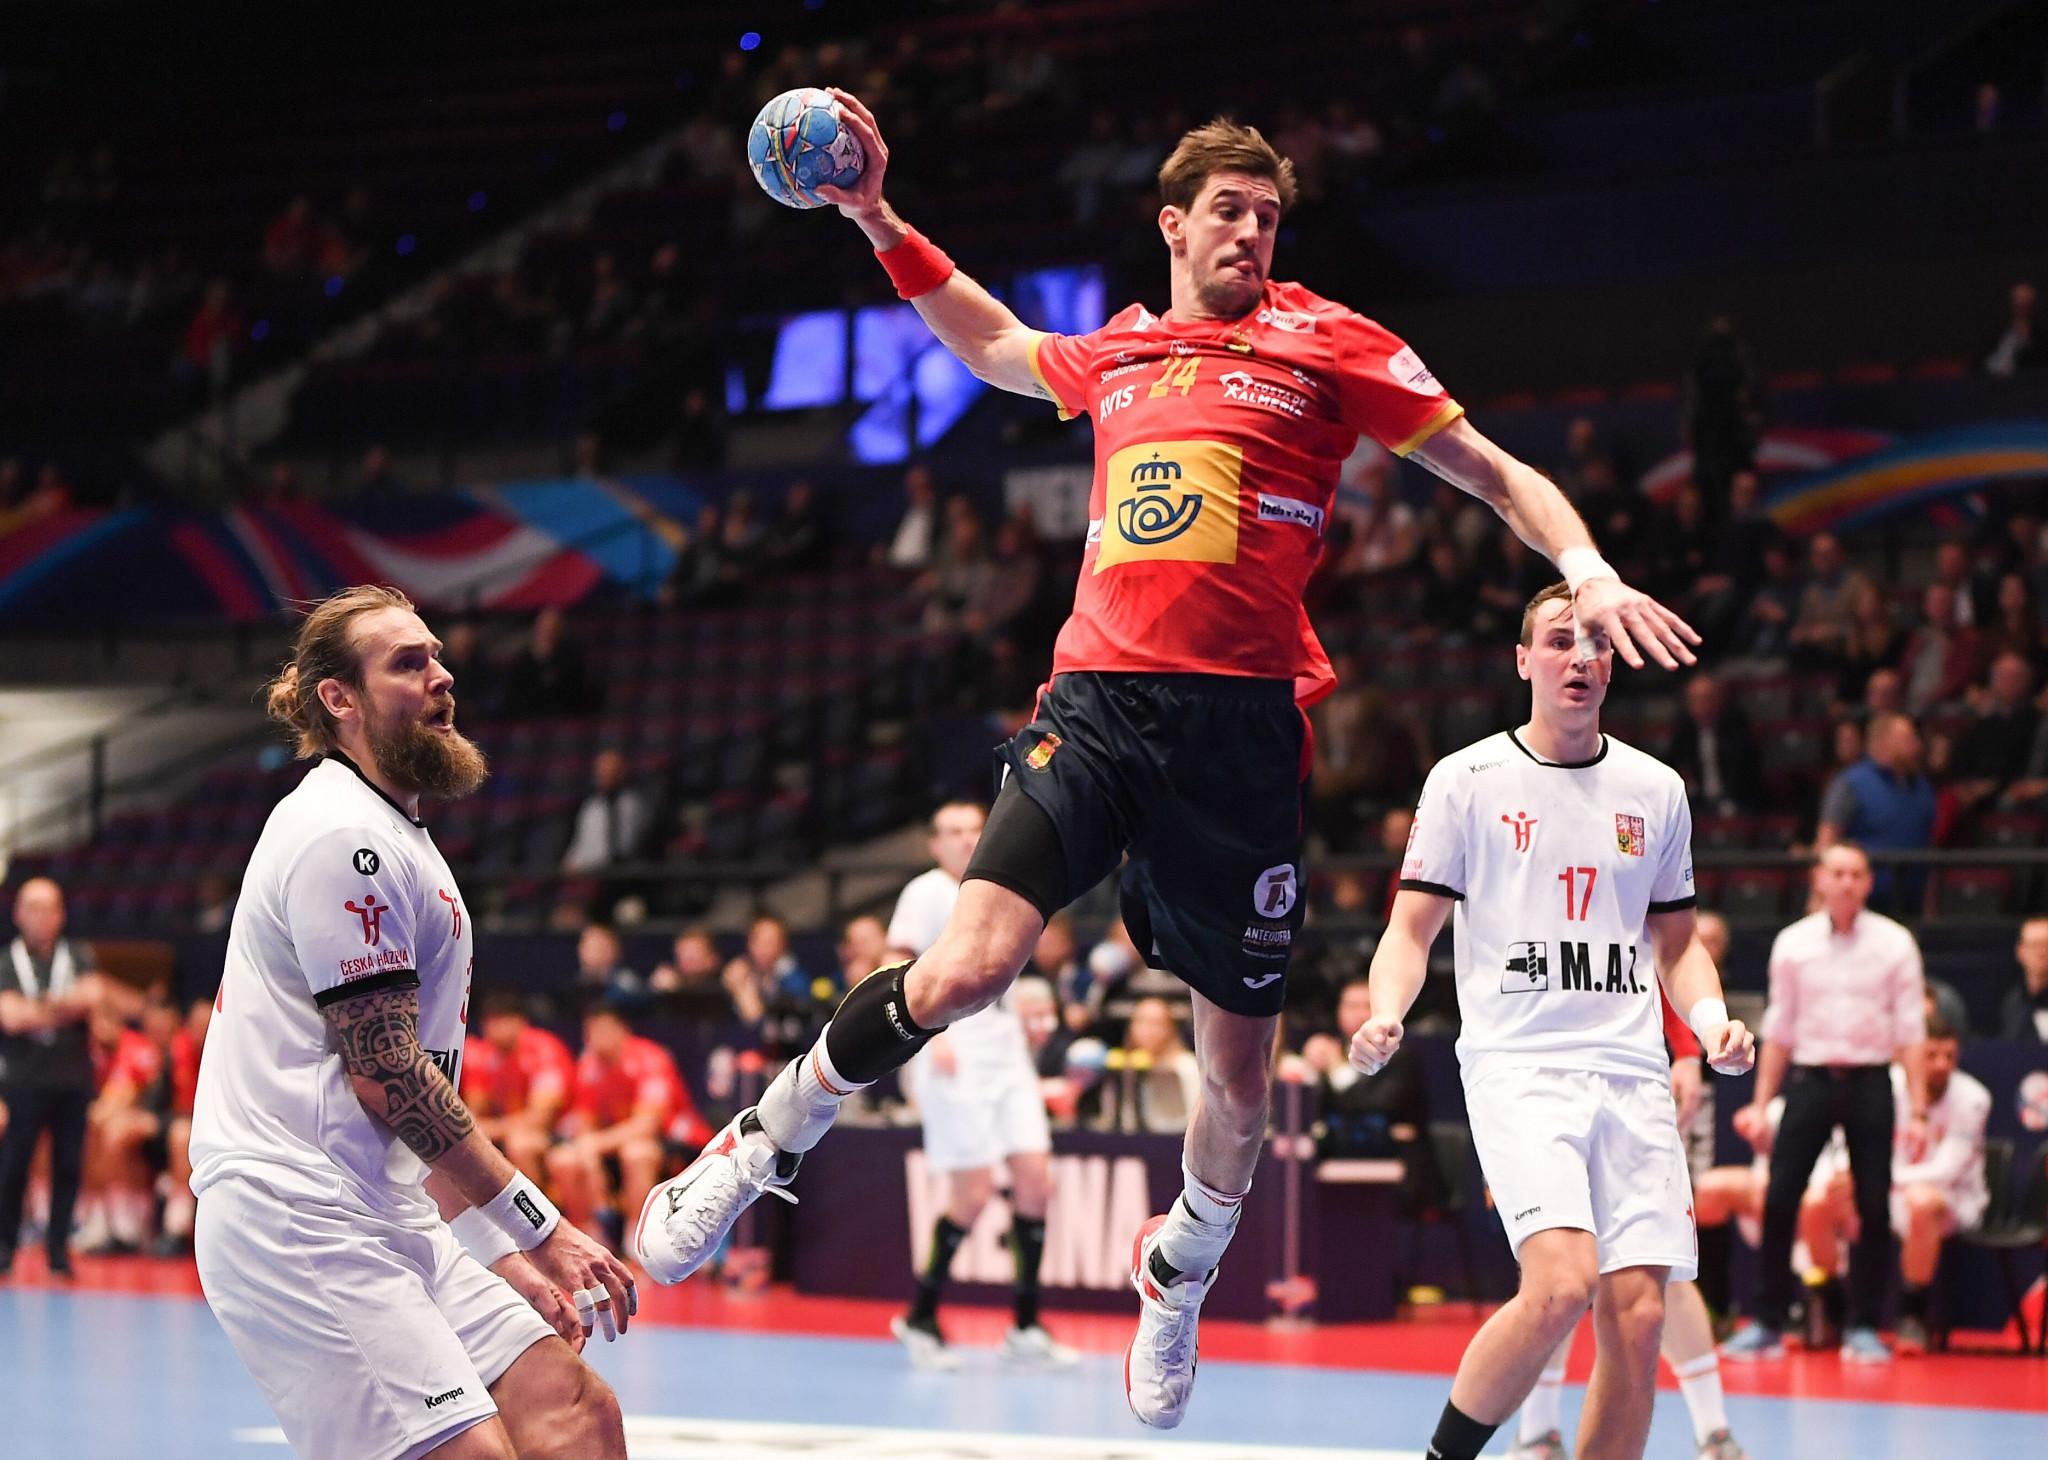 Defending champiions Spain are walking tall at the EHF Men's Championships ©Getty Images